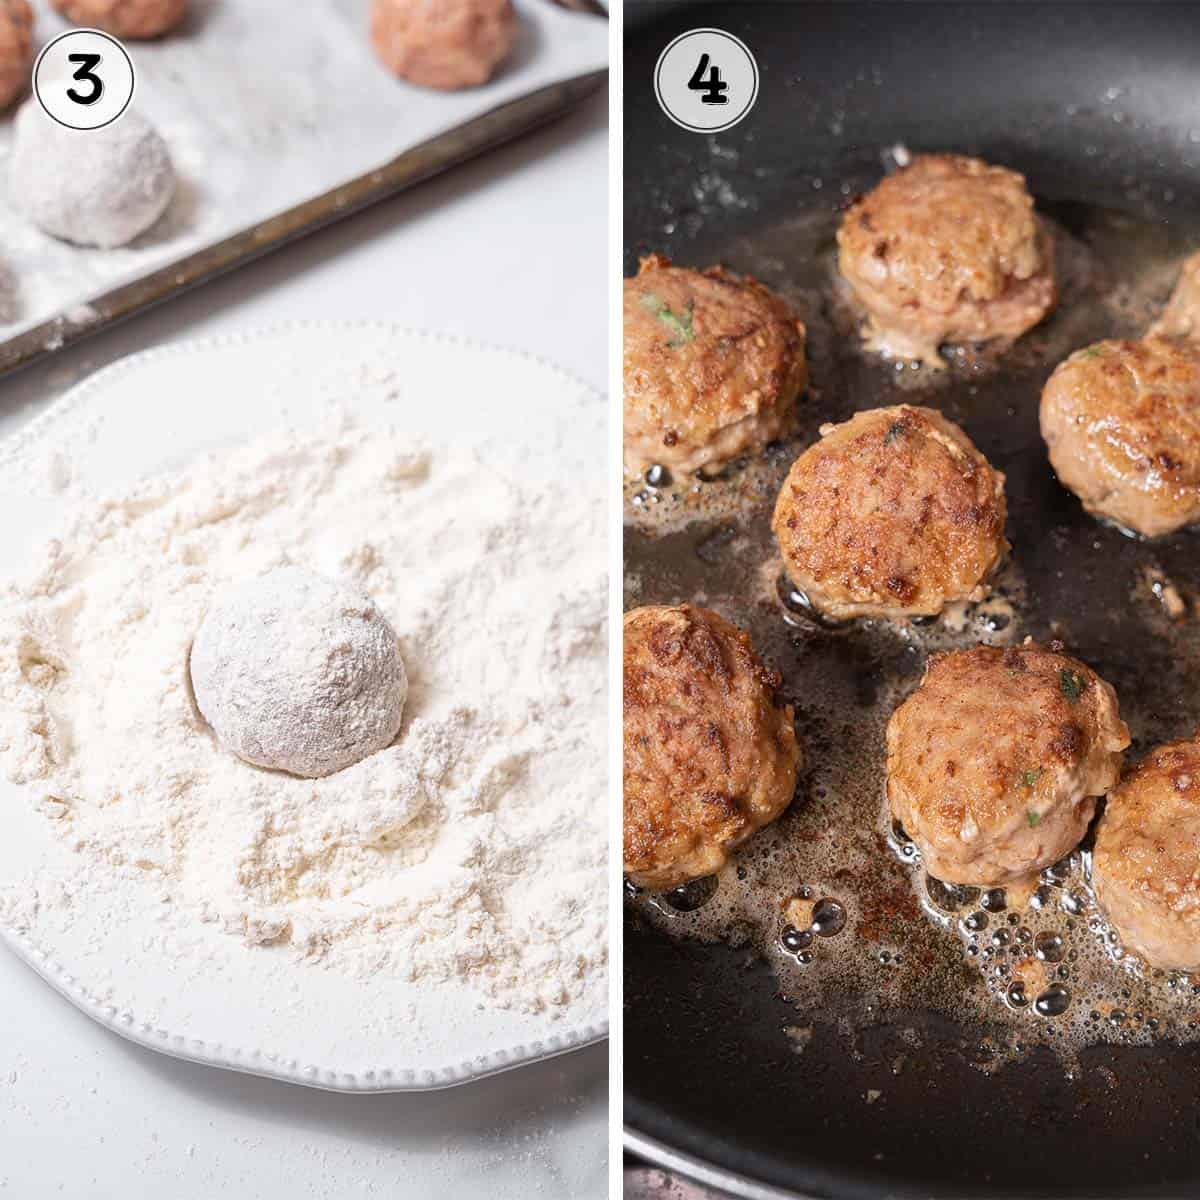 coating in flour and frying the meatballs.